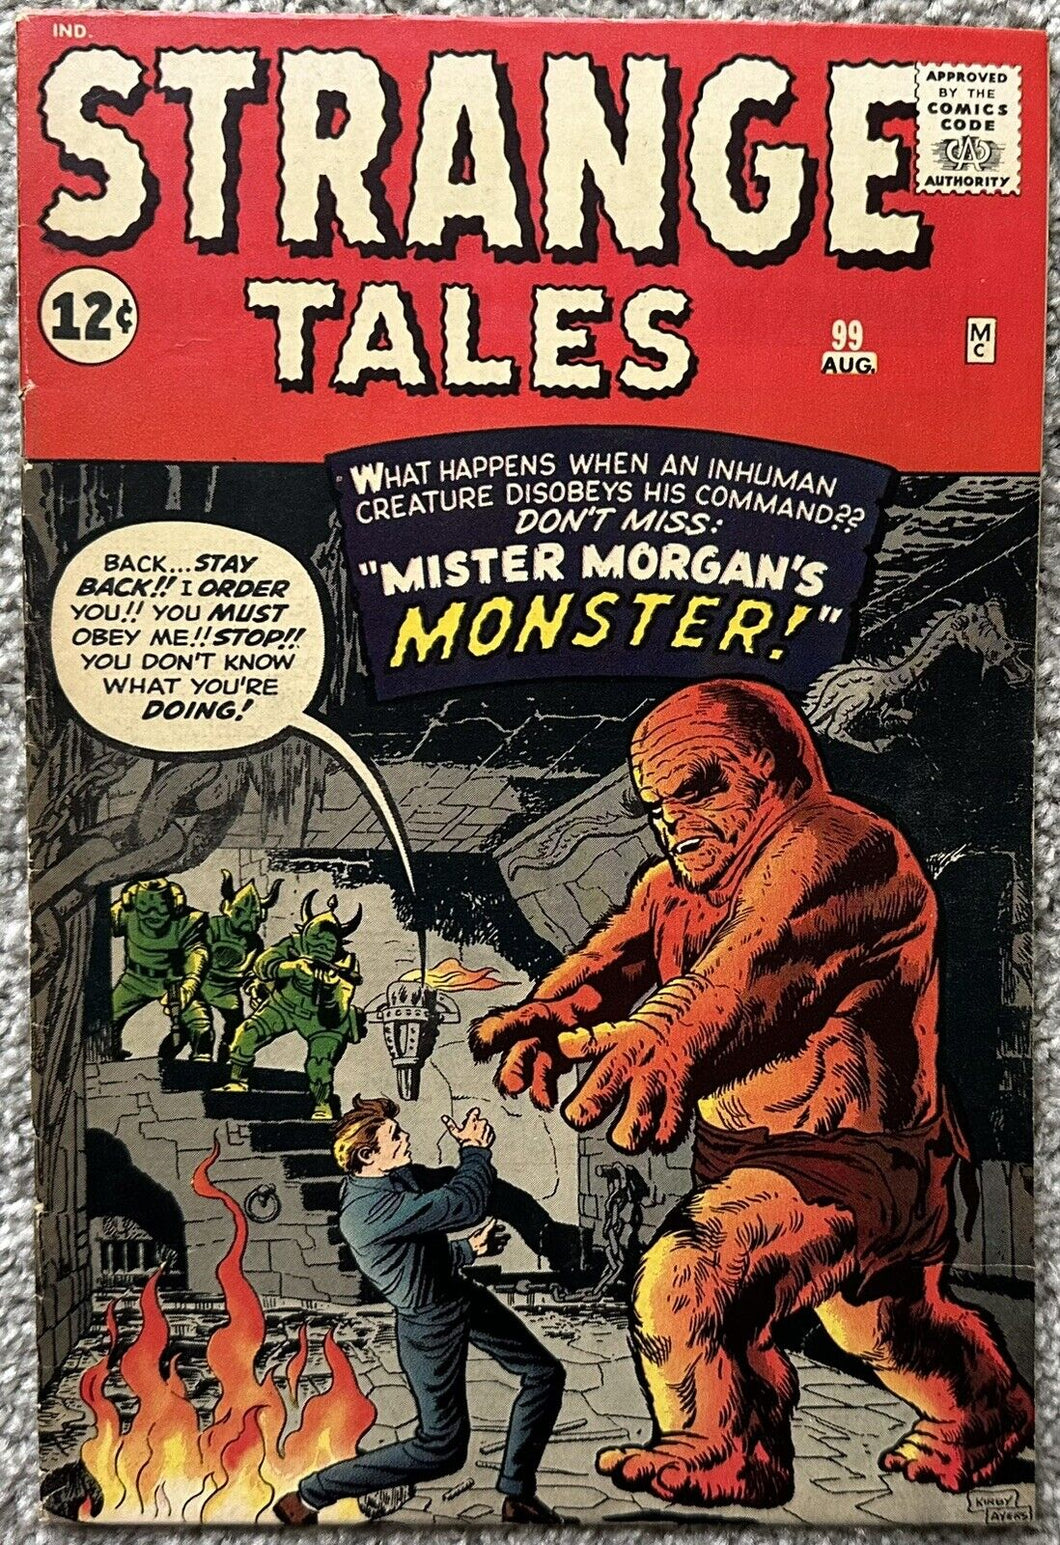 STRANGE TALES COMIC #99 (MARVEL,1962) Jack Kirby cover and art.